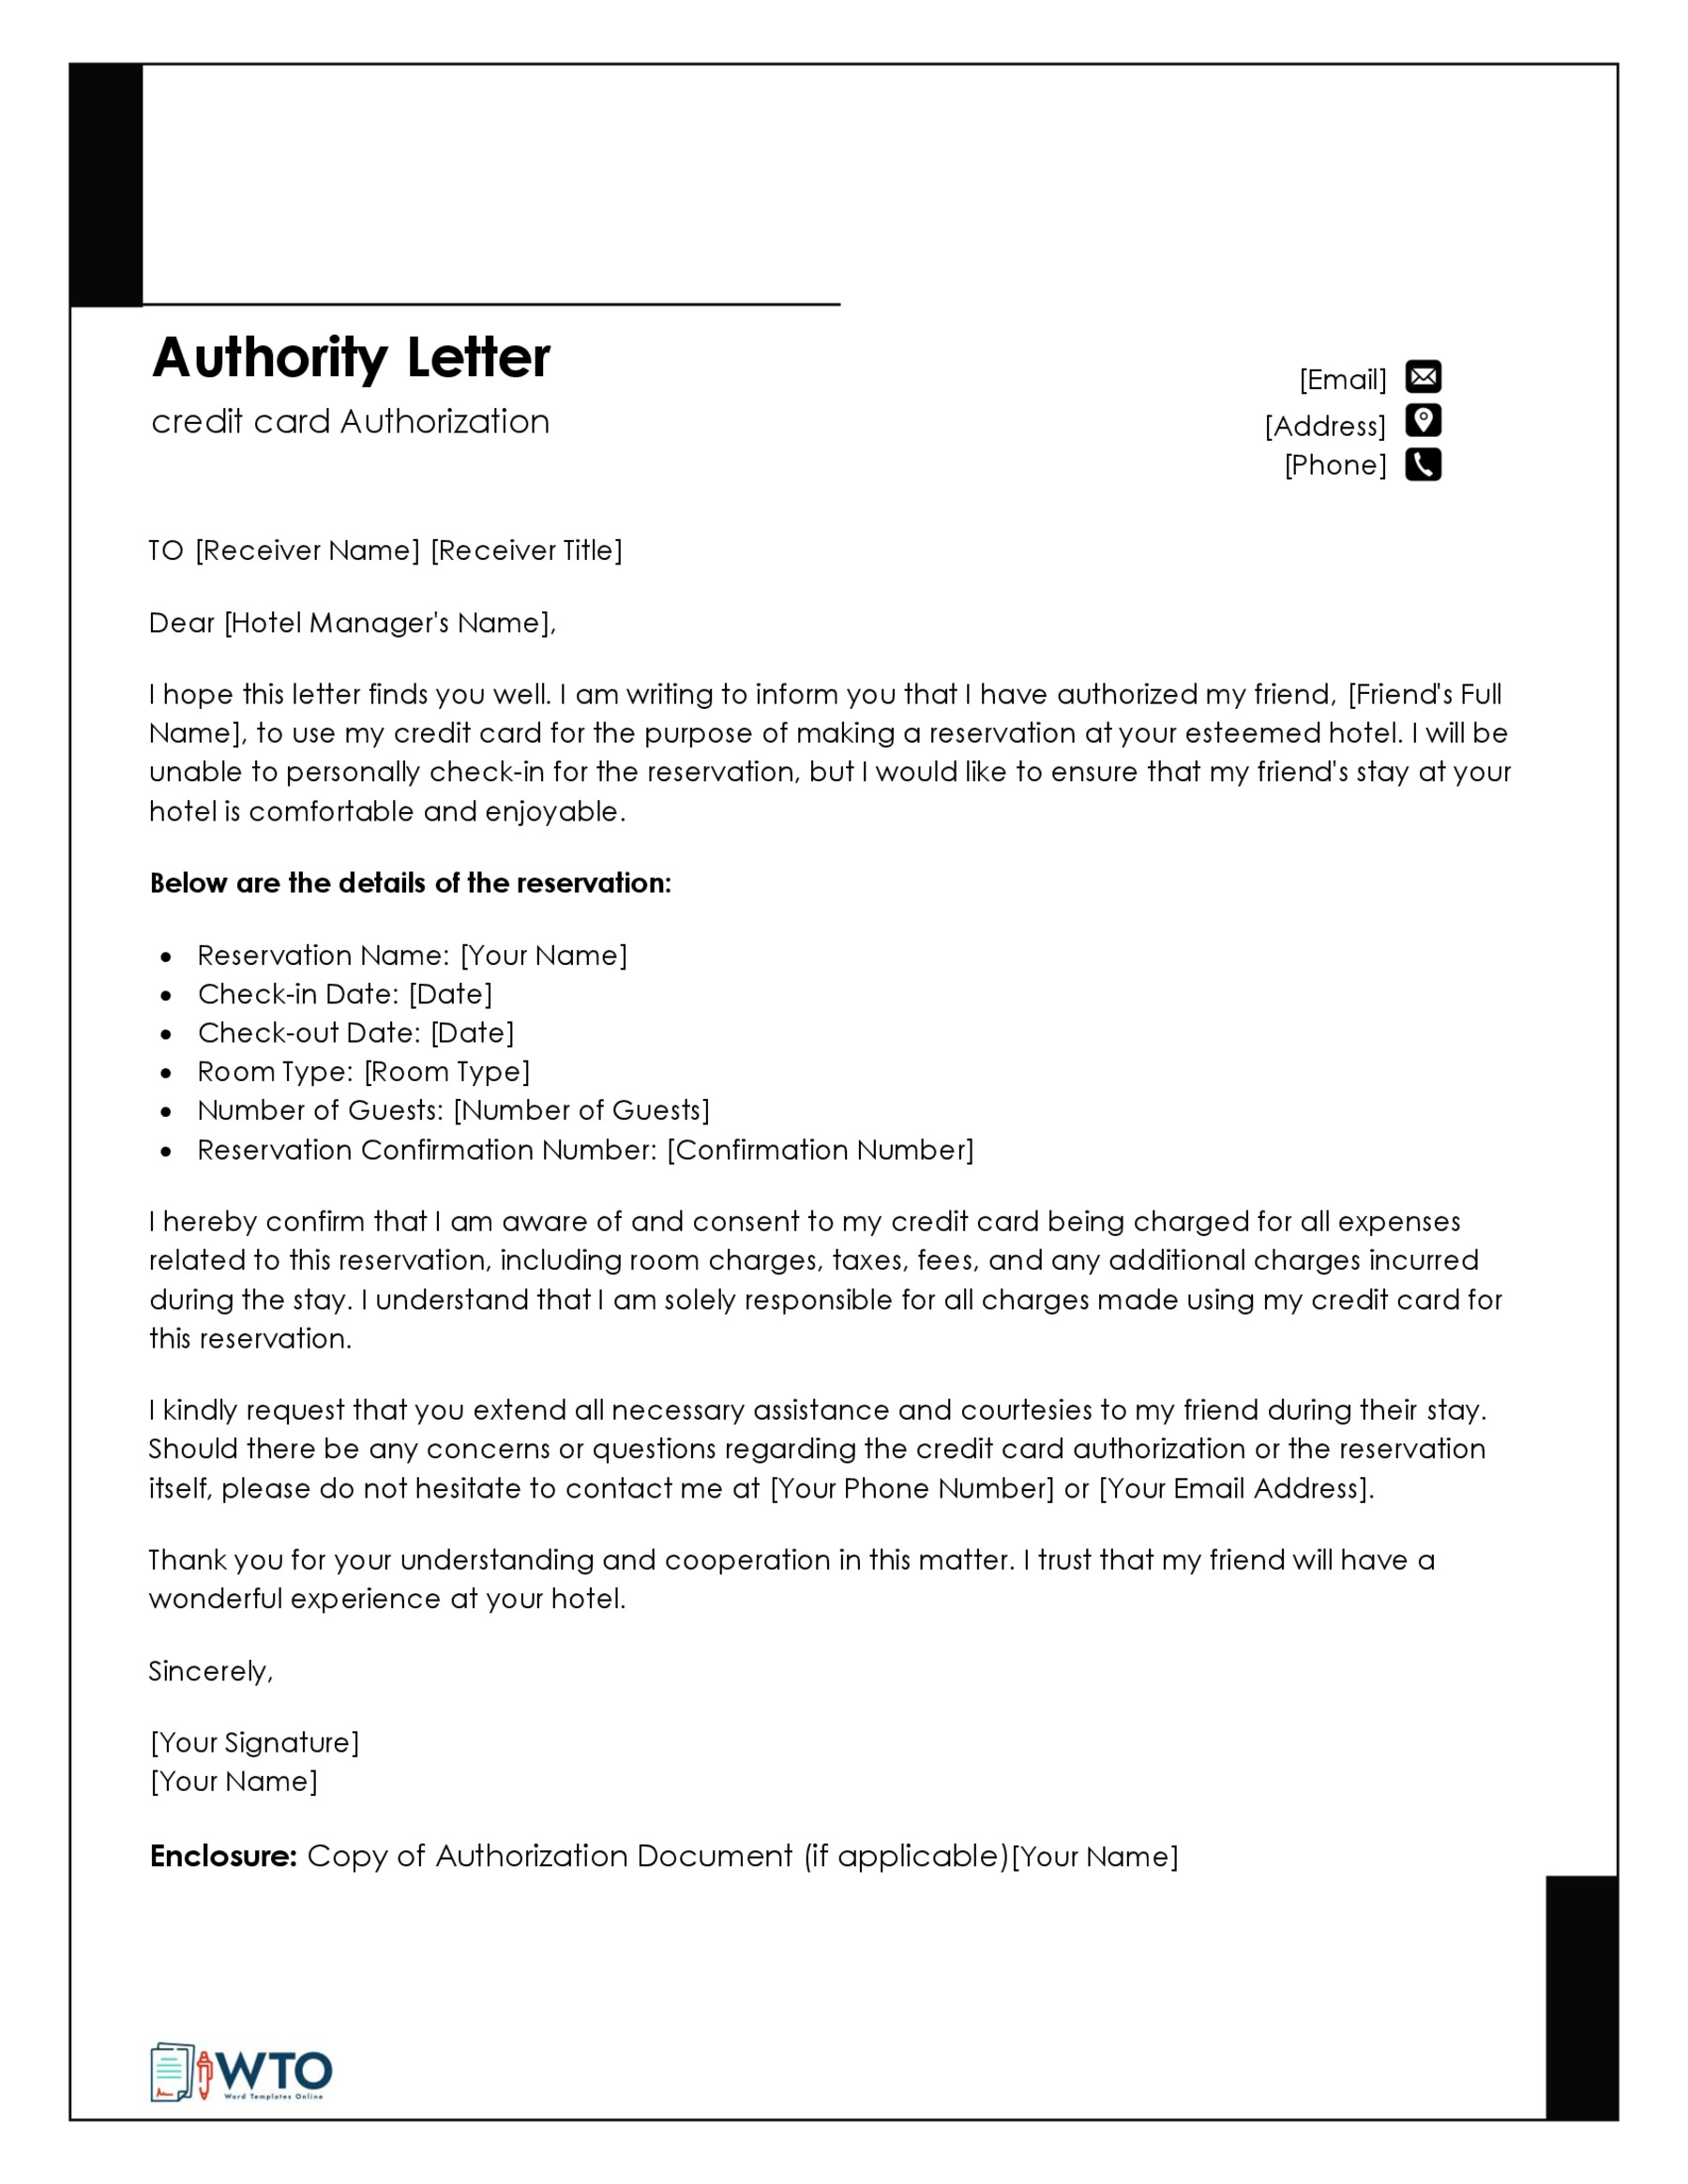 Template Credit Card Authorization Letter-Downloadable